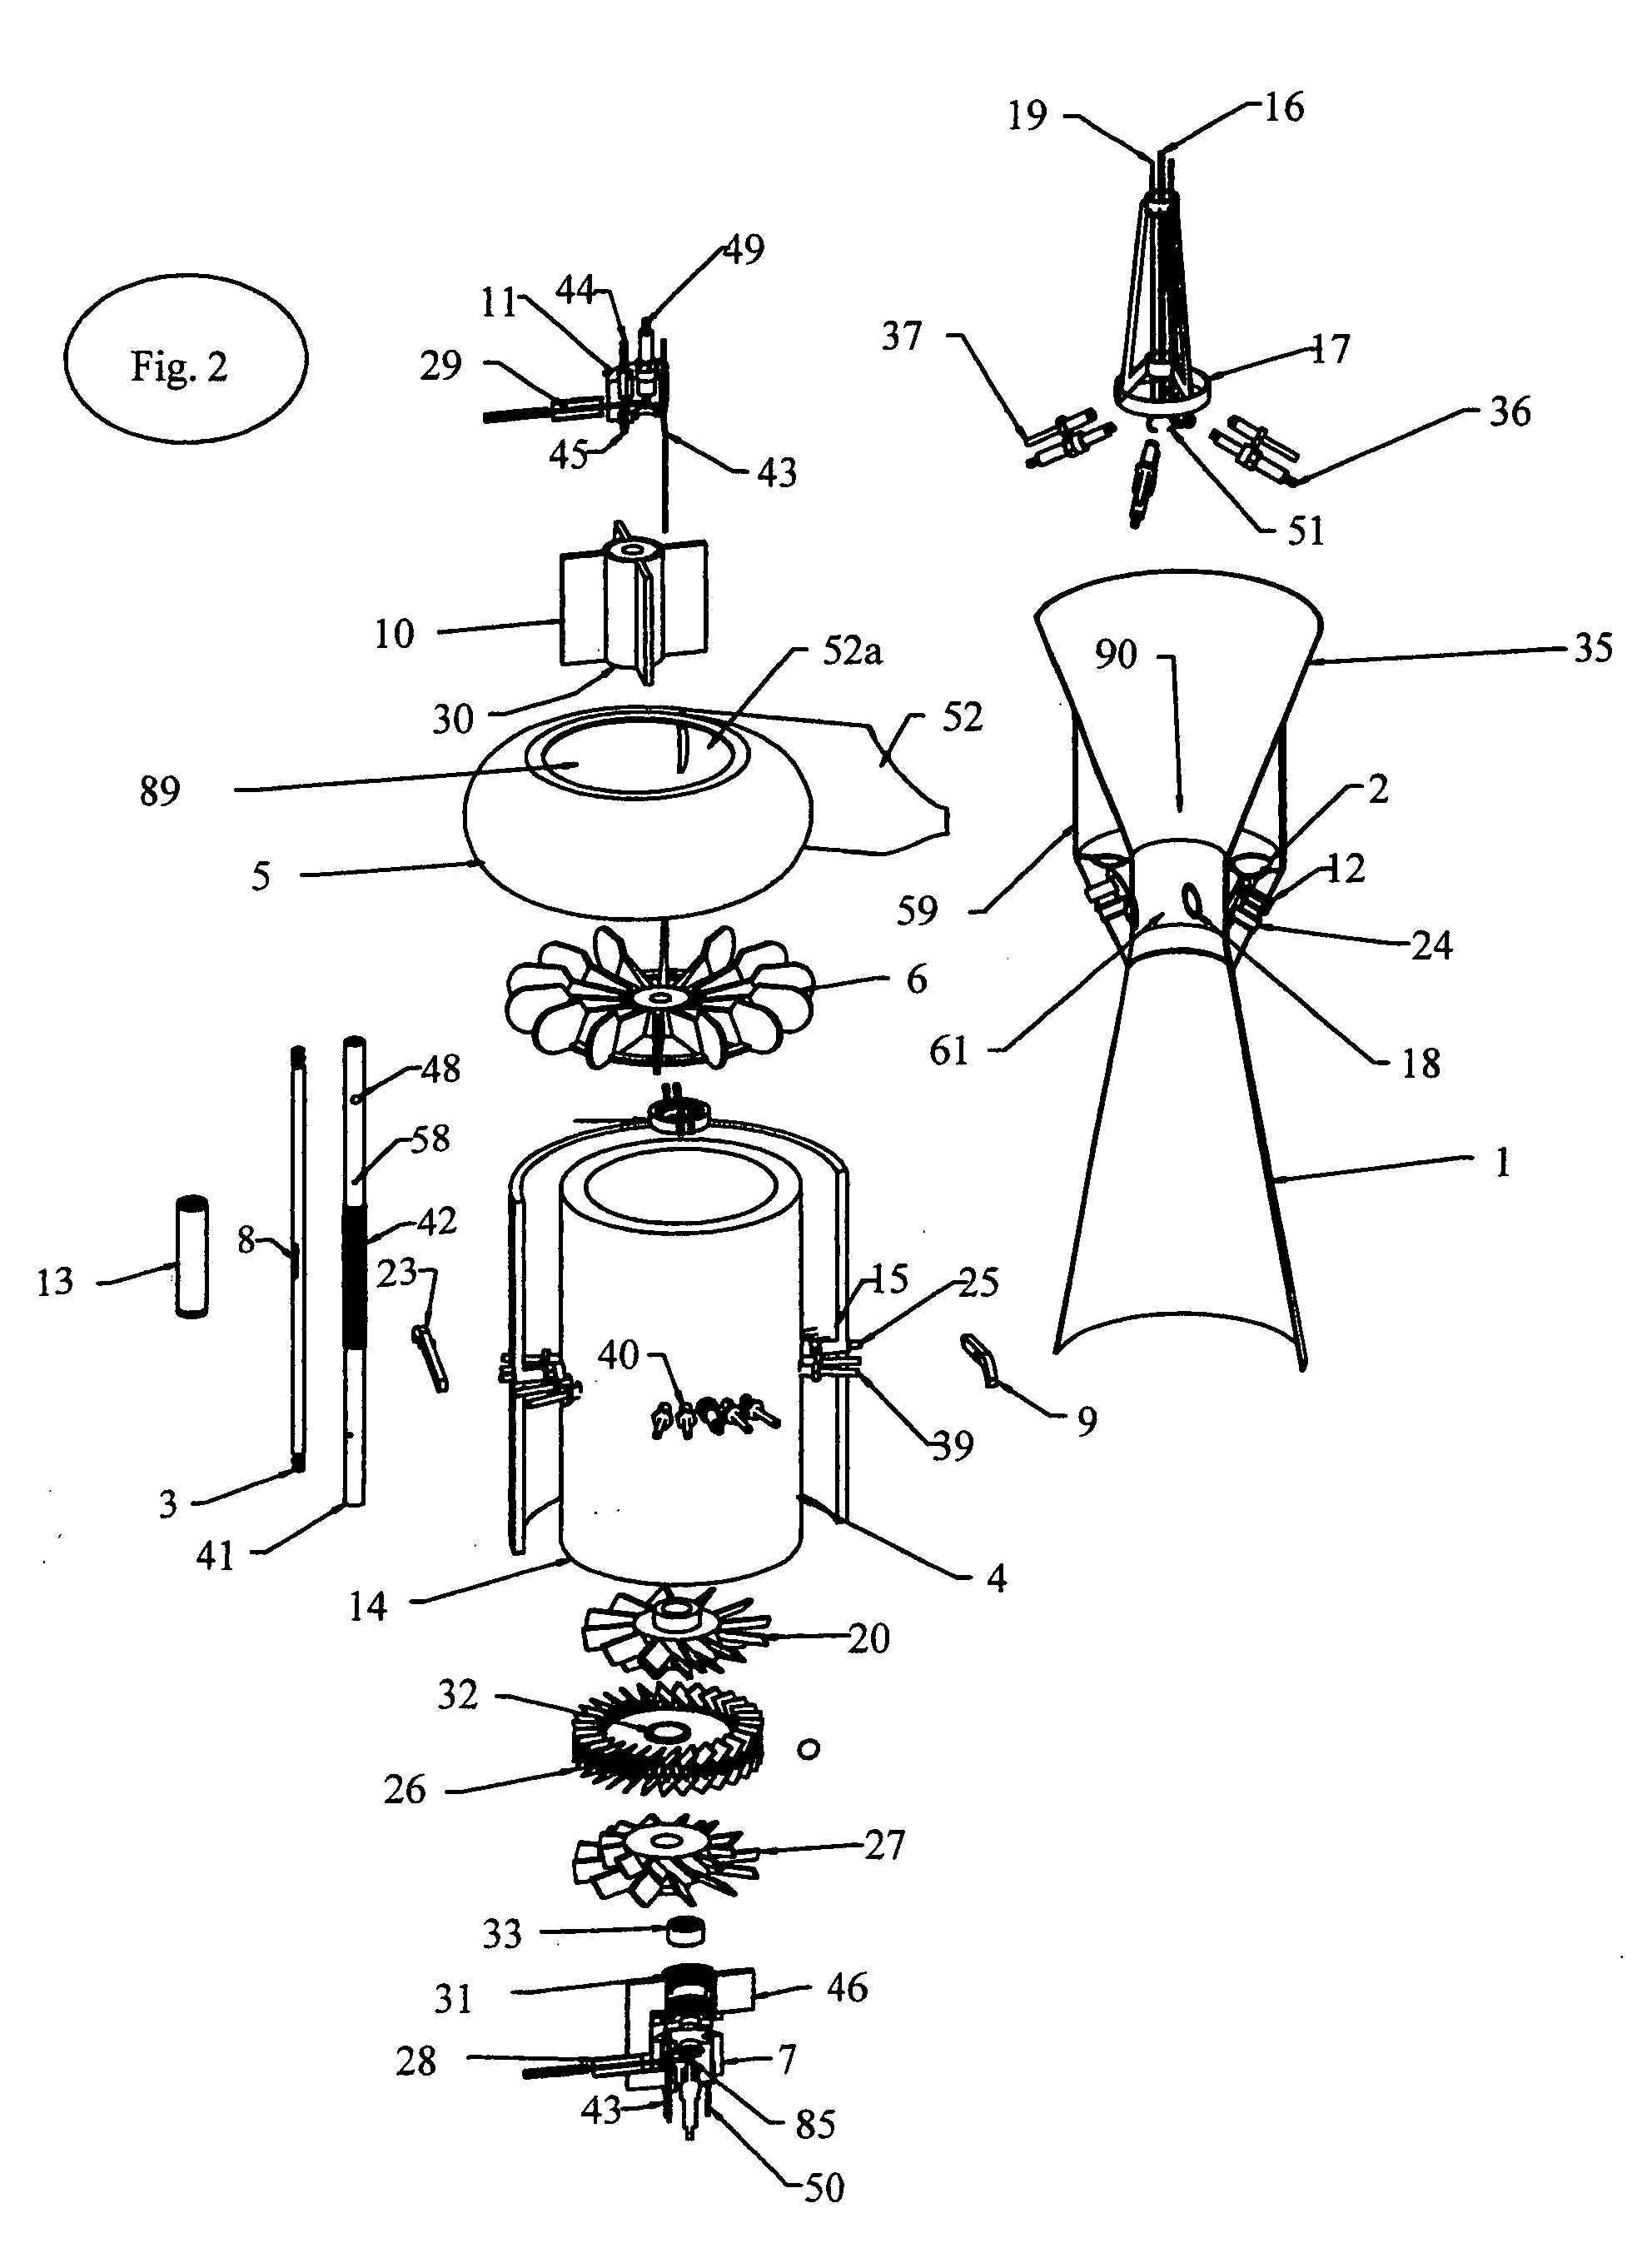 Methods of combining a series of more efficient aircraft engines into a unit, or modular units